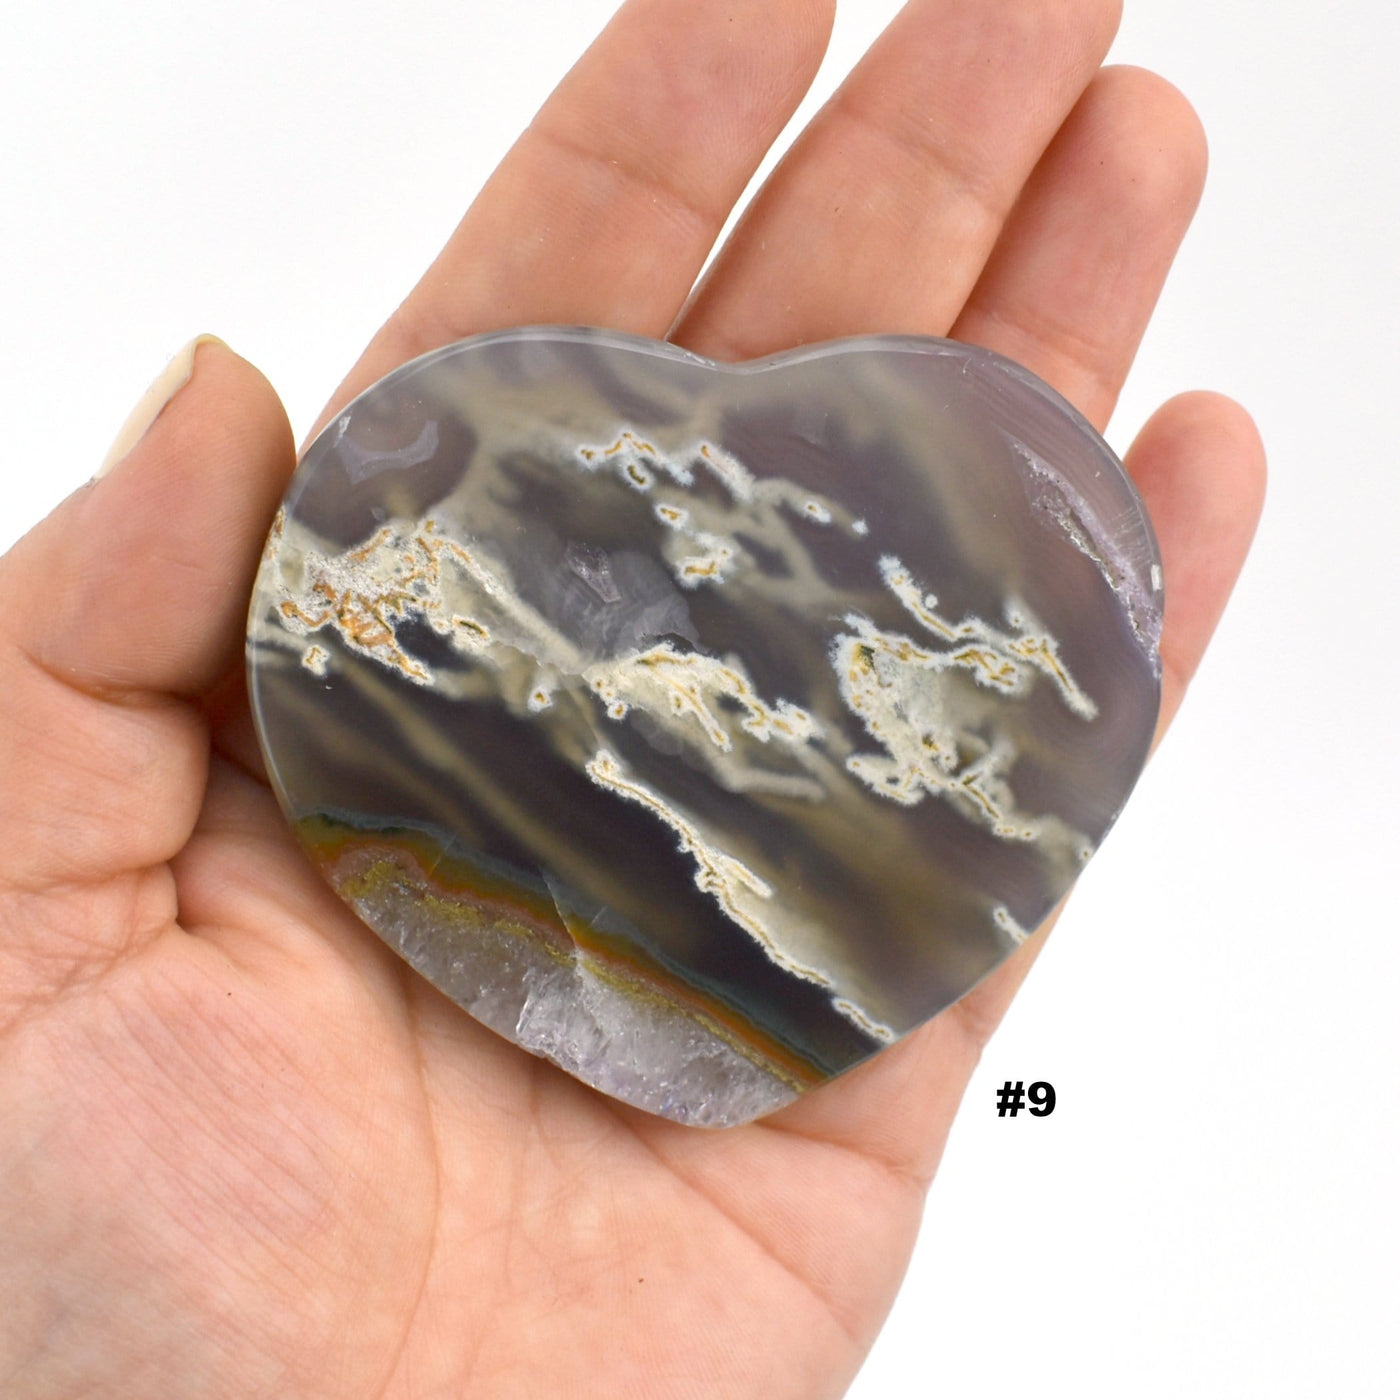 Agate heart slice #9 in a hand with a white background.